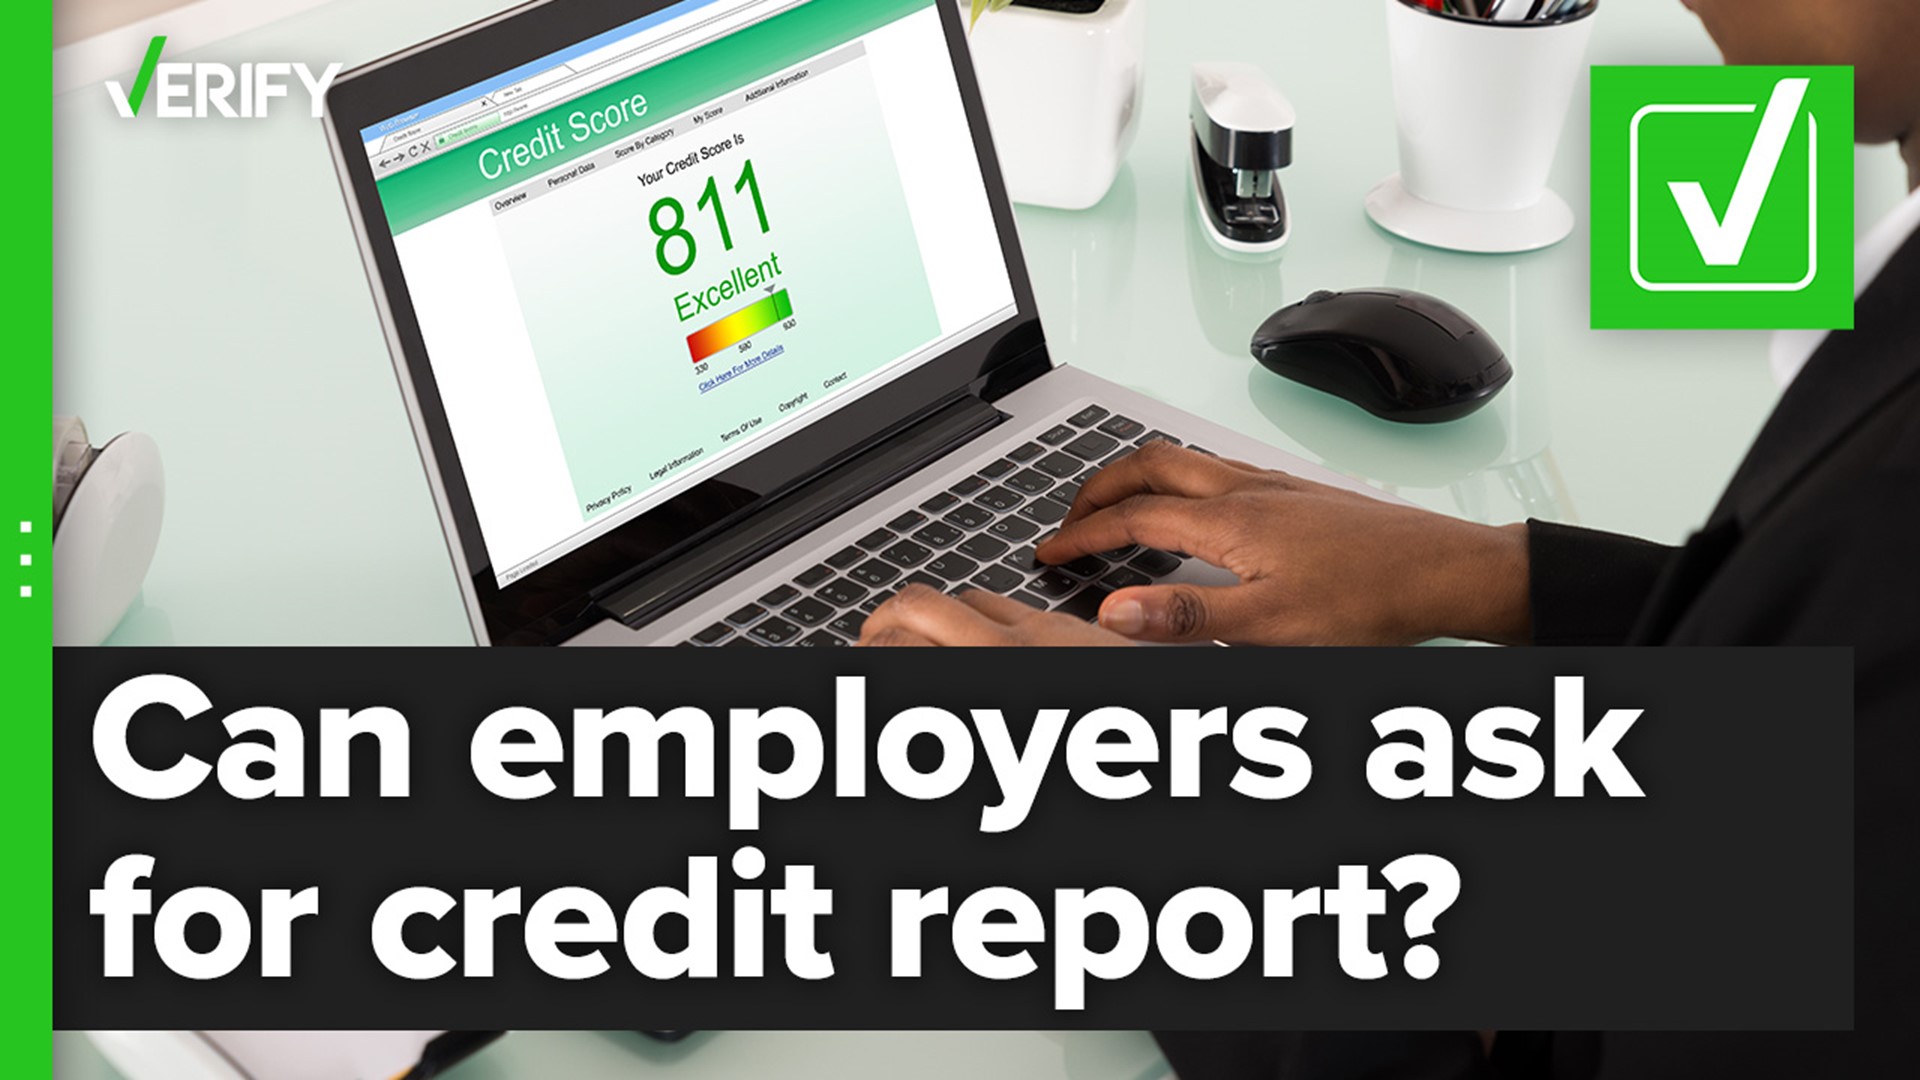 Federal, state and local laws differ in whether an employer can access your credit report. We break down the rules.